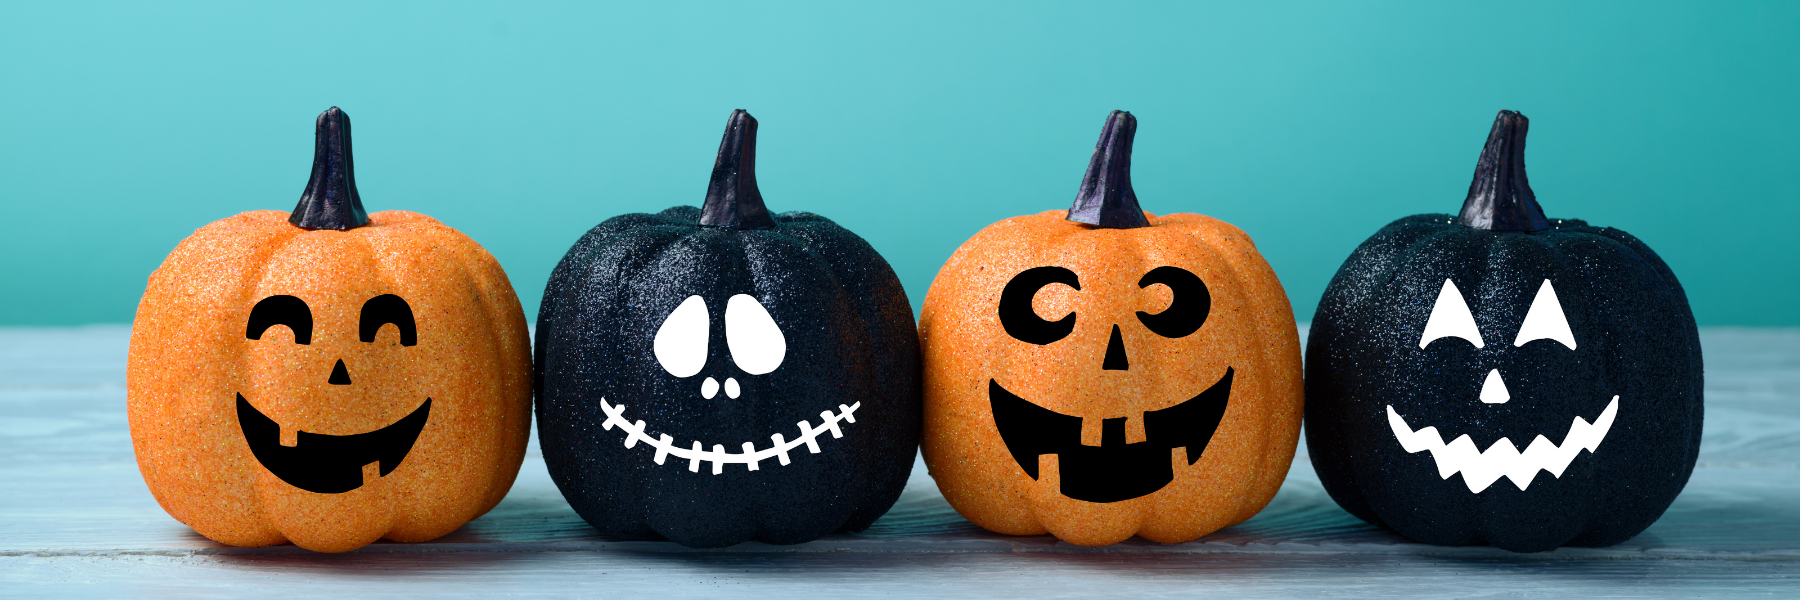 5 Tricks & Treats Only VAs Can Help You With